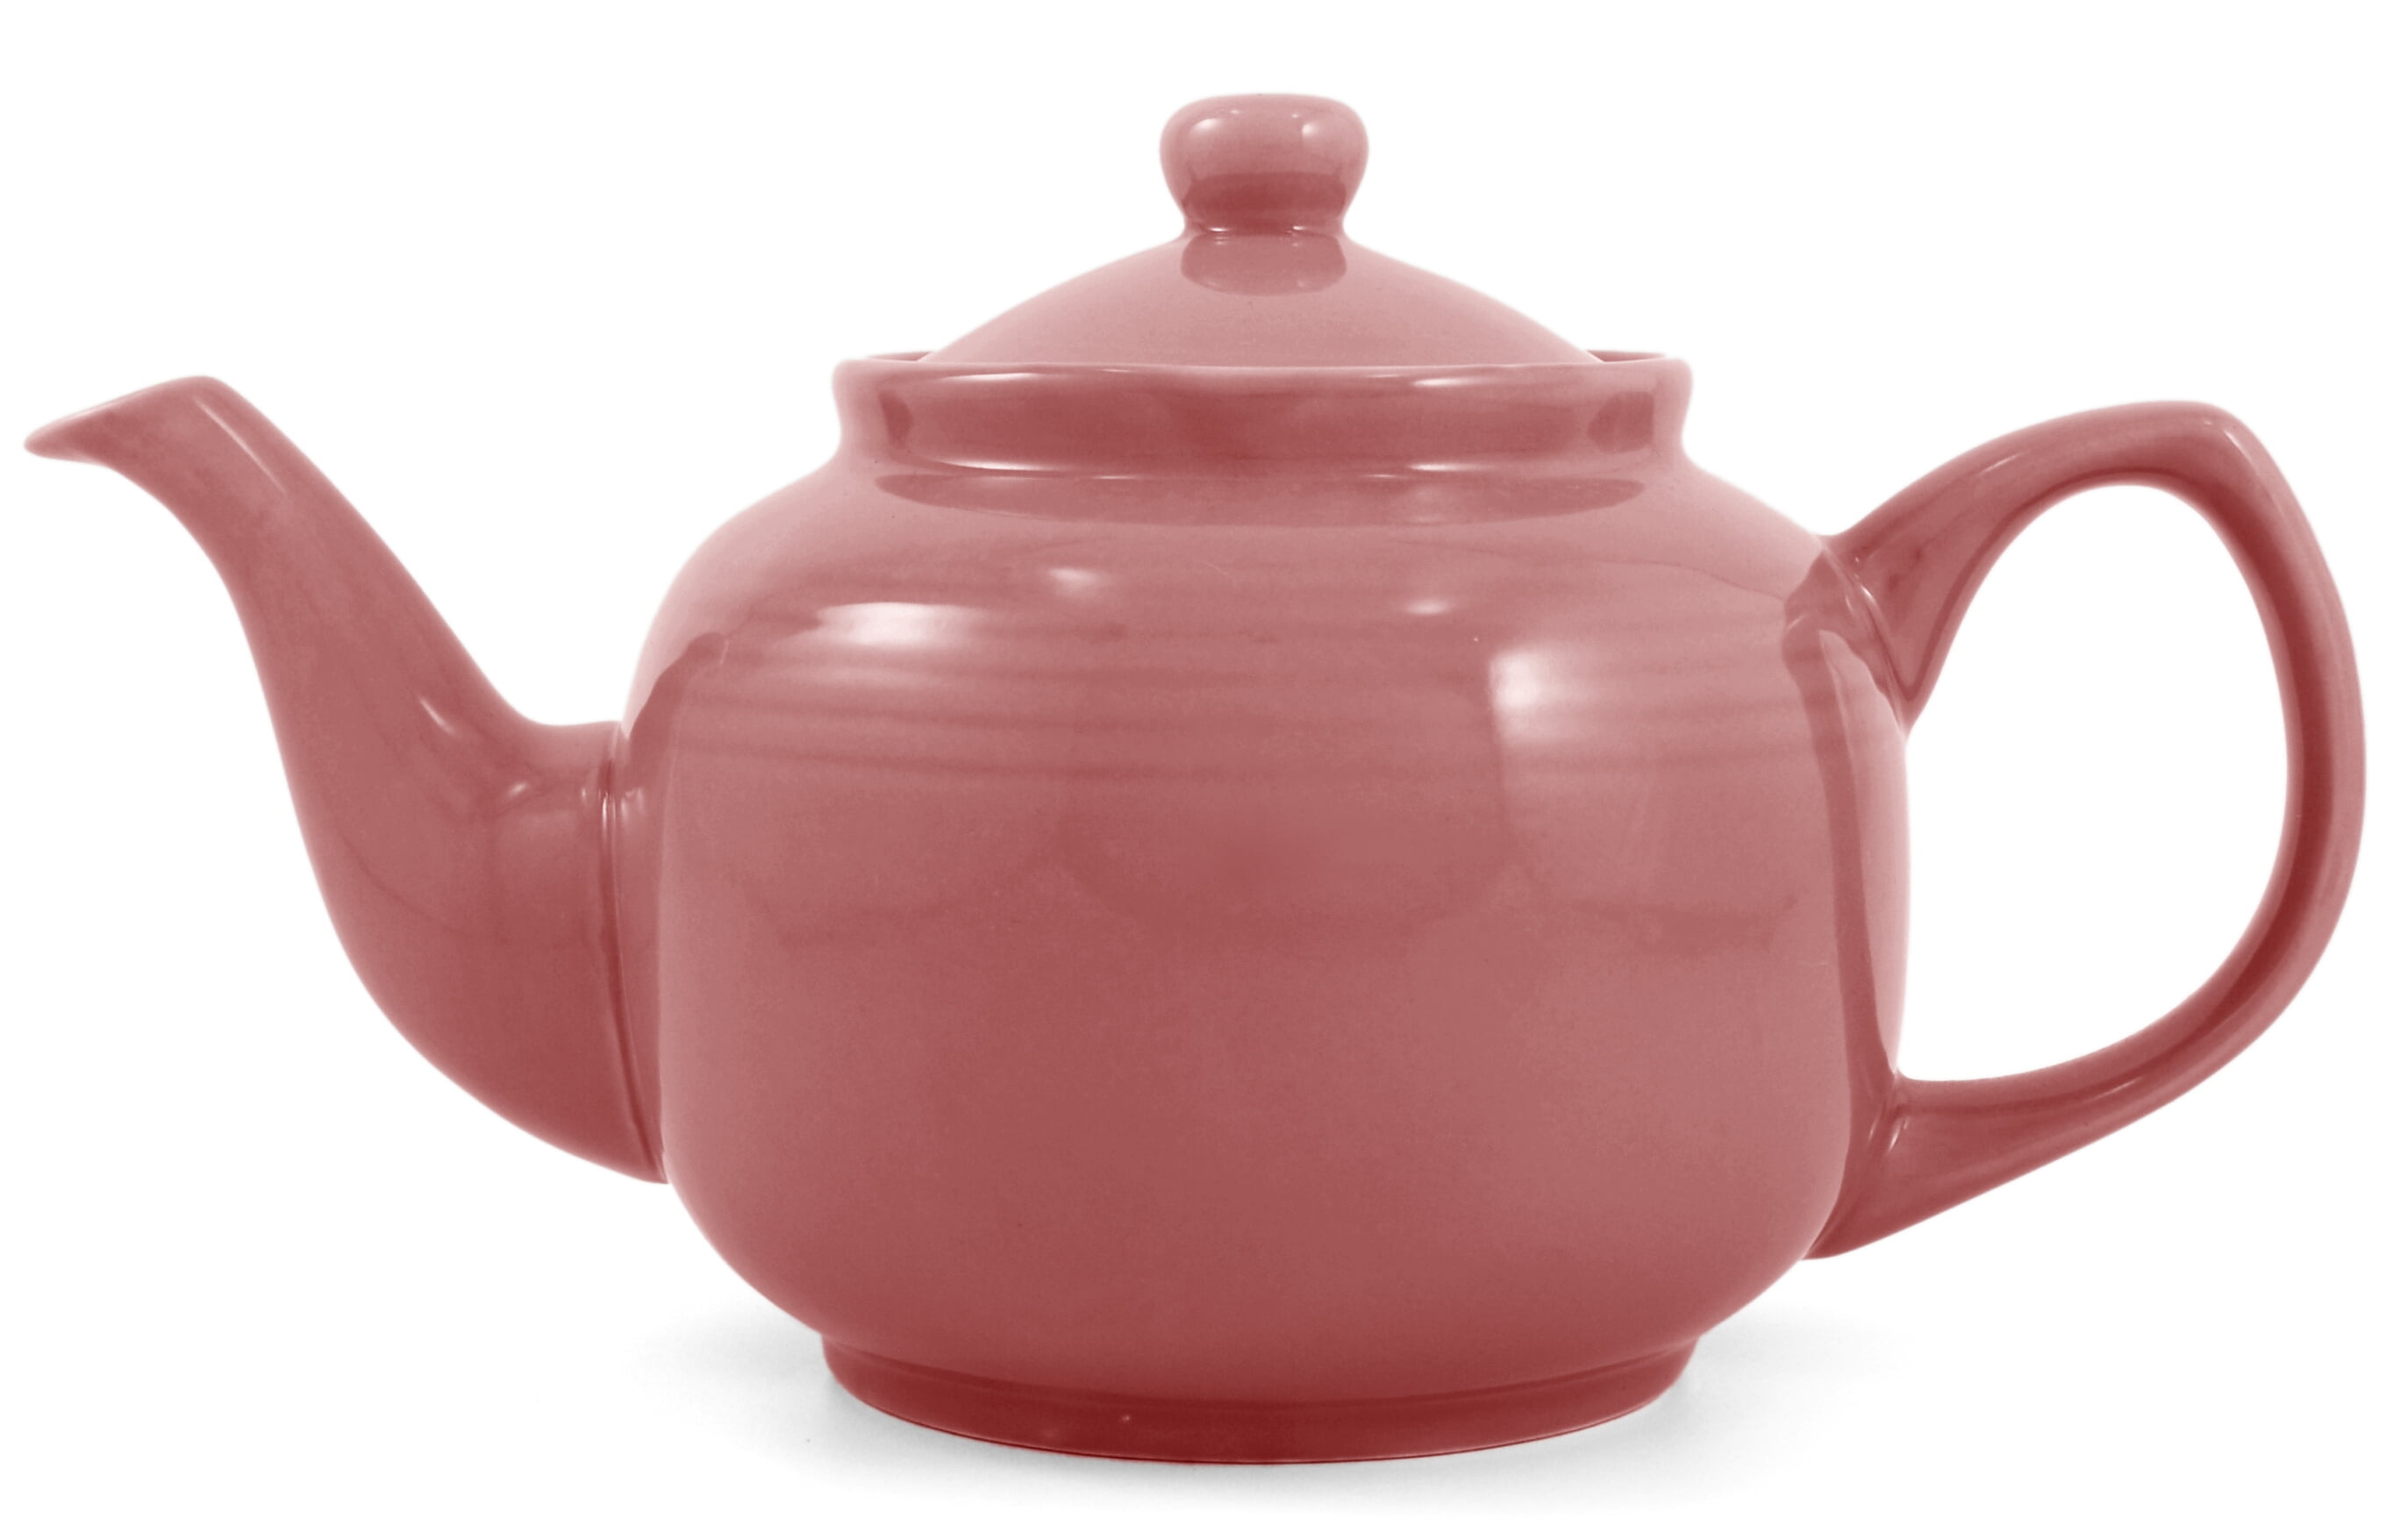 Sweese Porcelain Teapot, 40 Ounce Tea Pot - Large Enough for 5 Cups, White